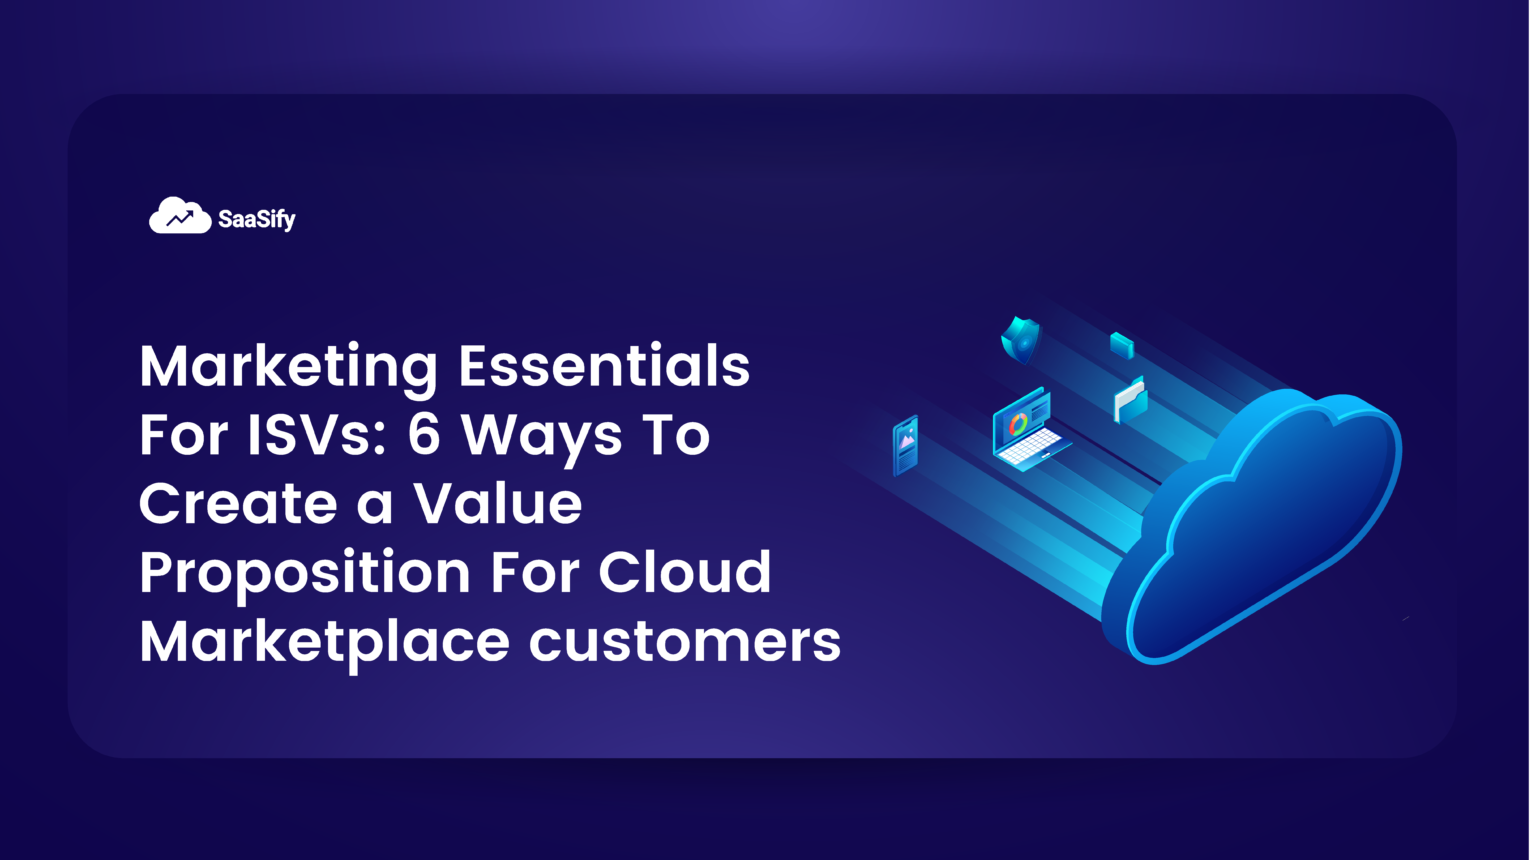 Marketing Essentials For ISVs 6 Ways To Create a Value Proposition For Cloud Marketplace customers 1536x860 1